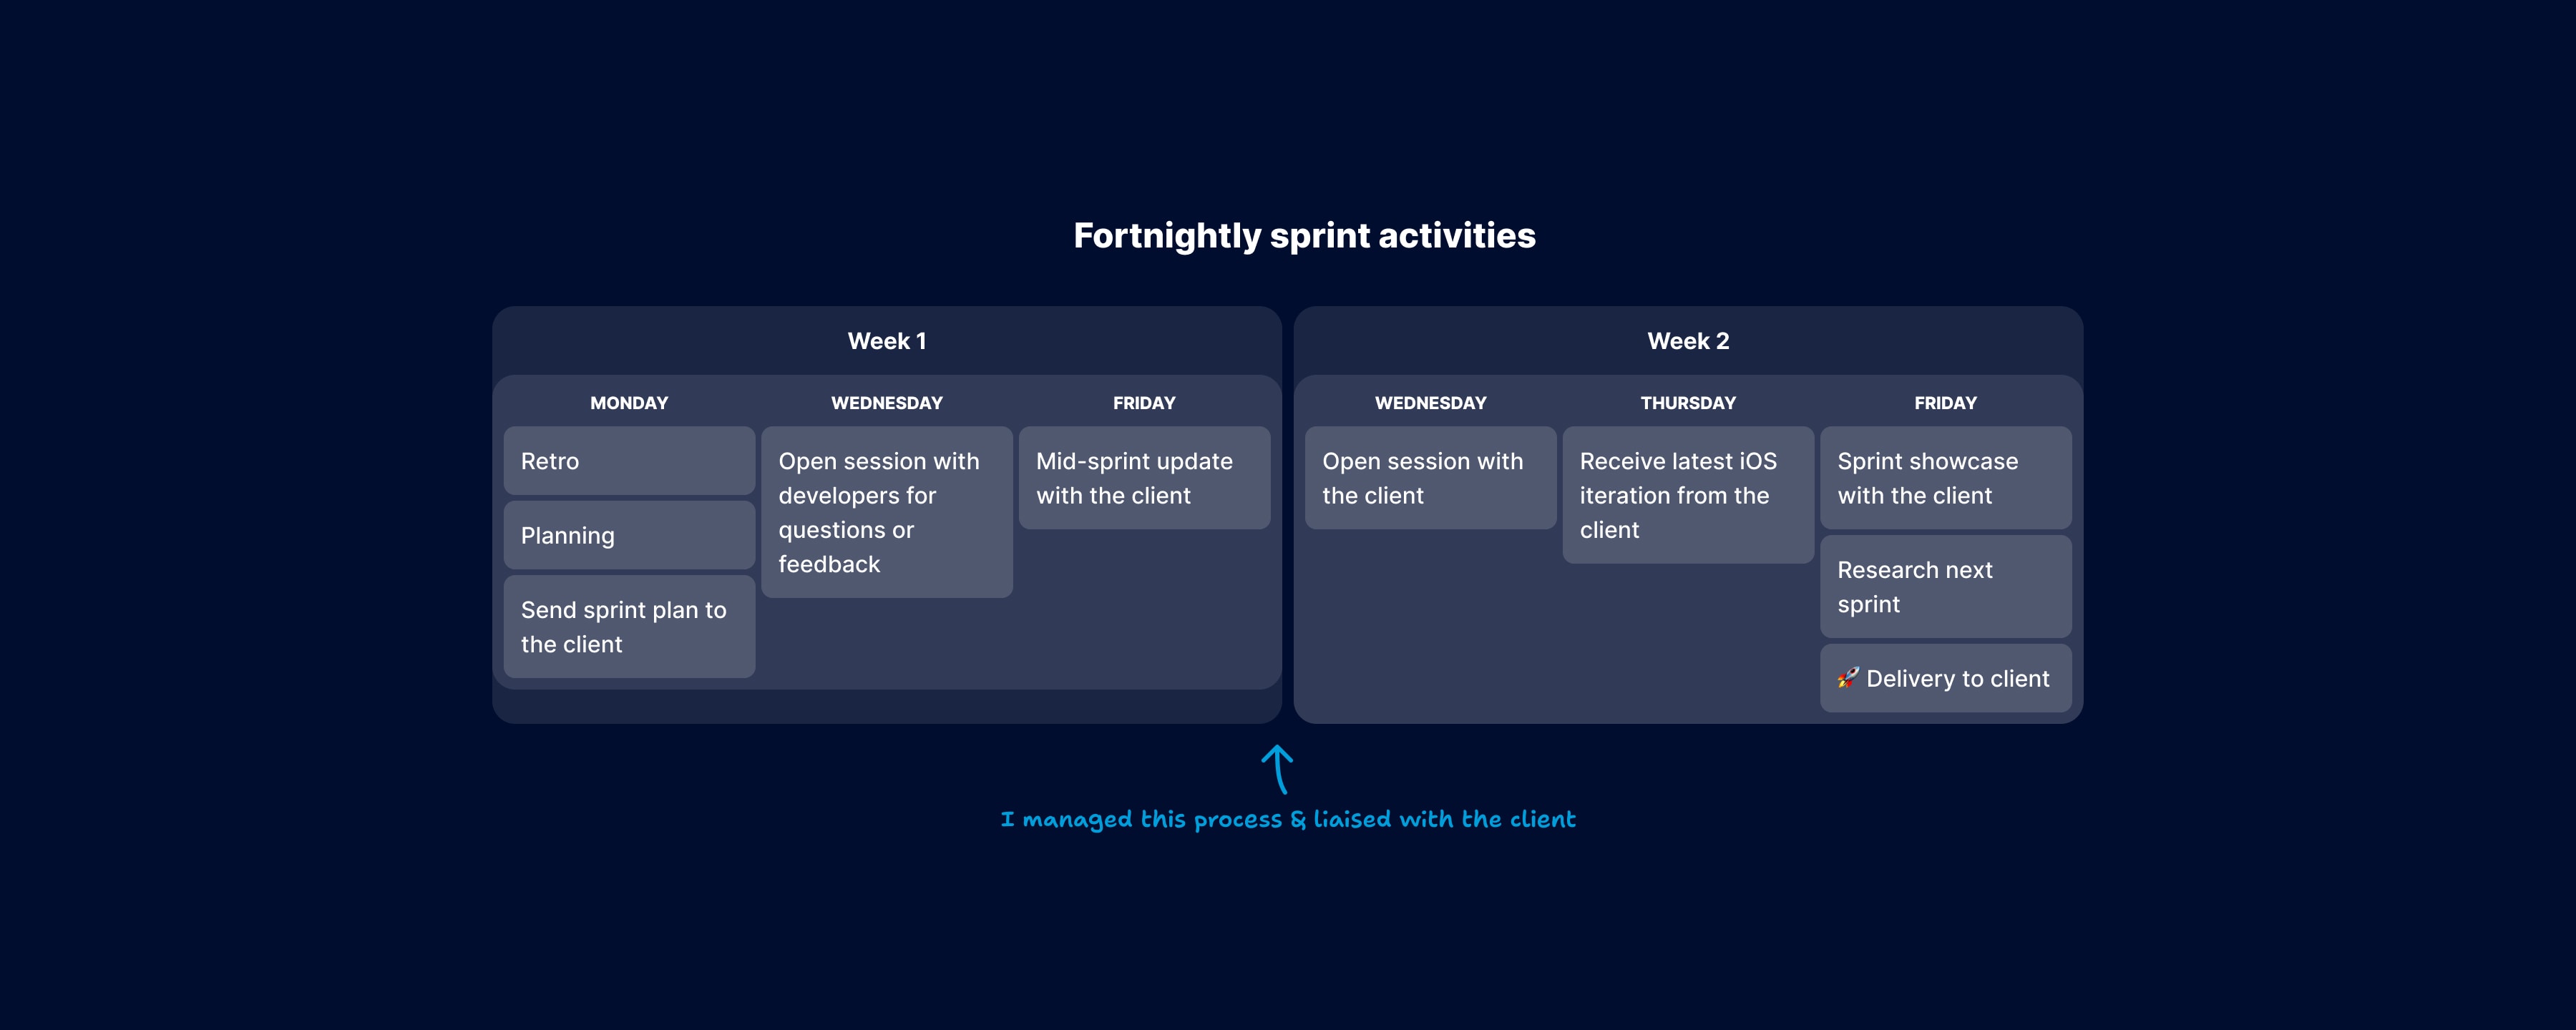 Fortnightly sprint activities